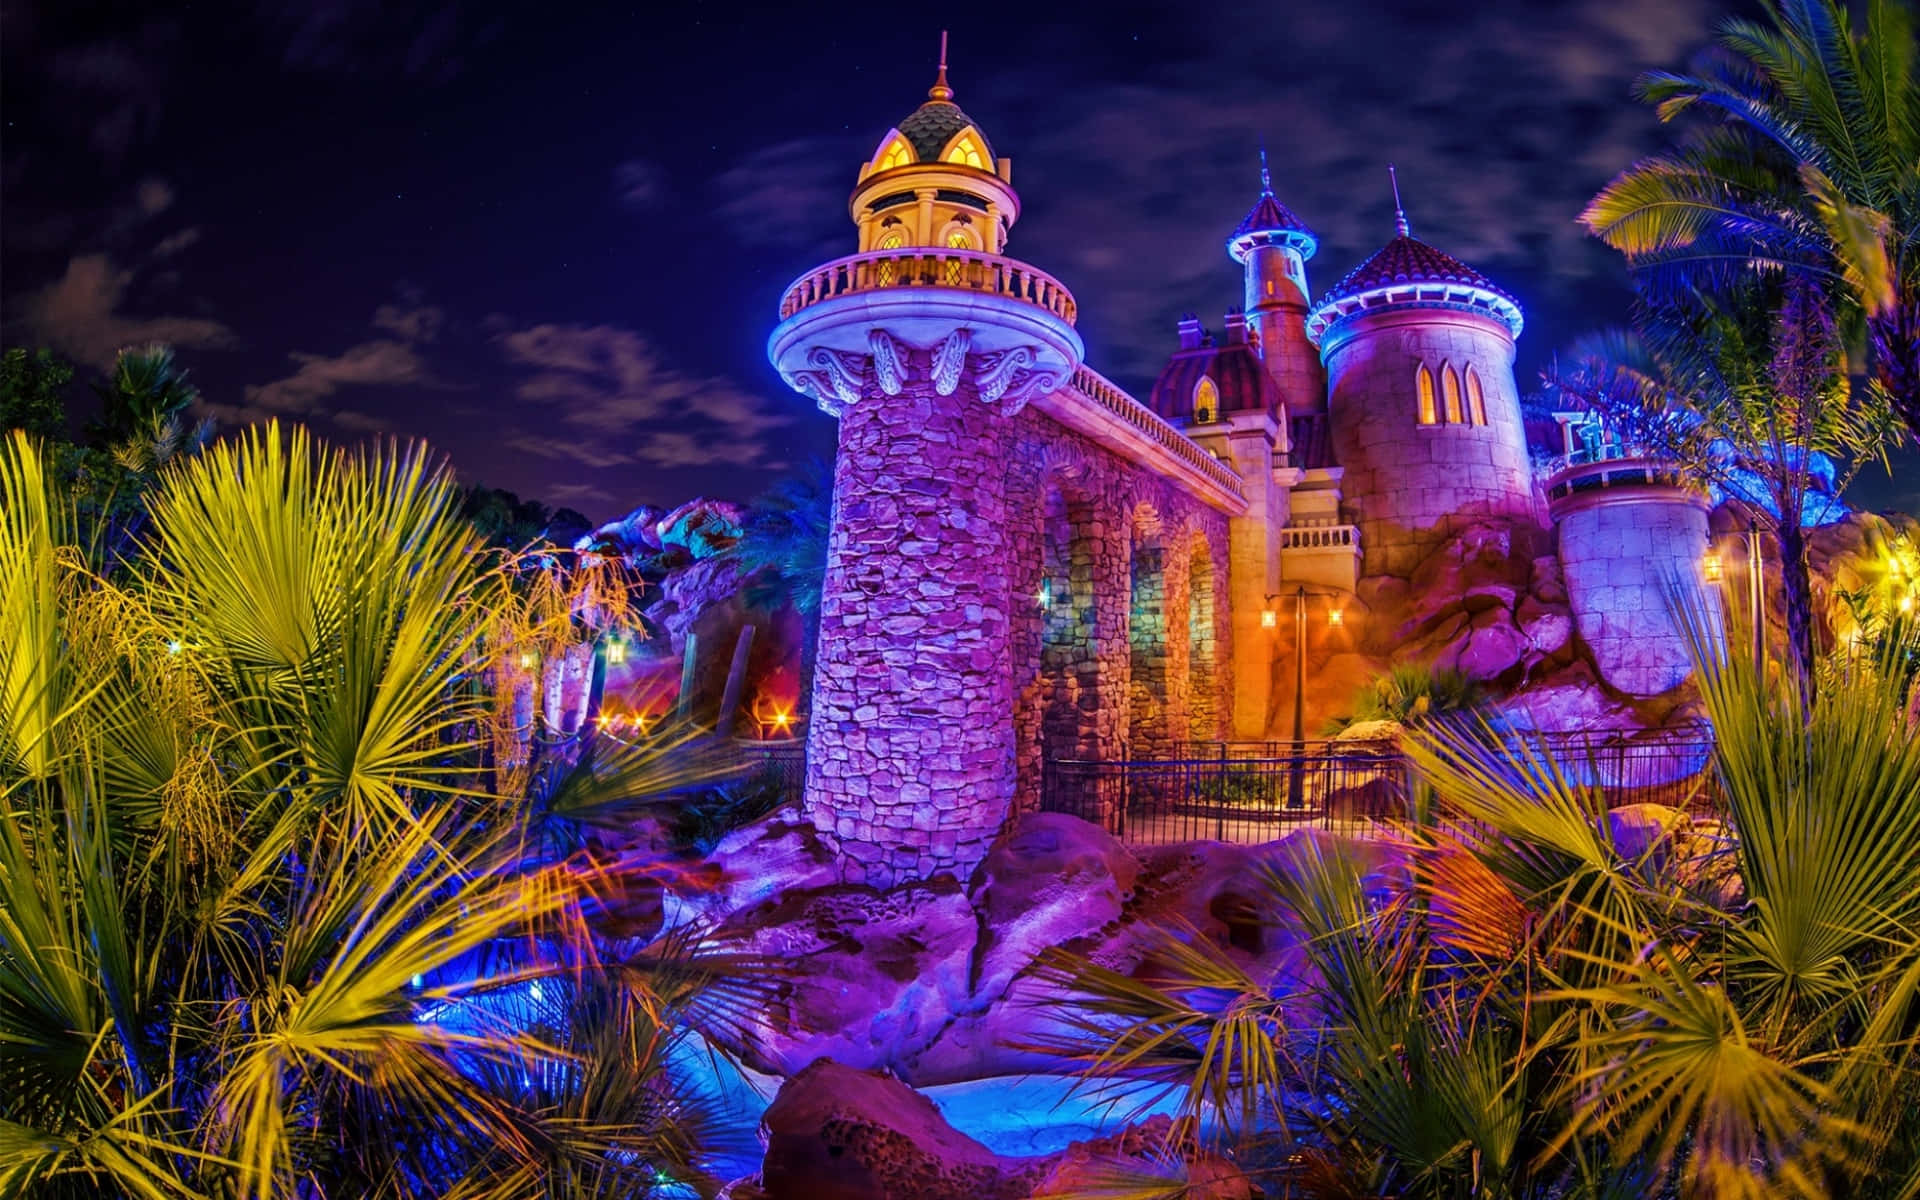 A Castle Lit Up At Night In A Tropical Setting